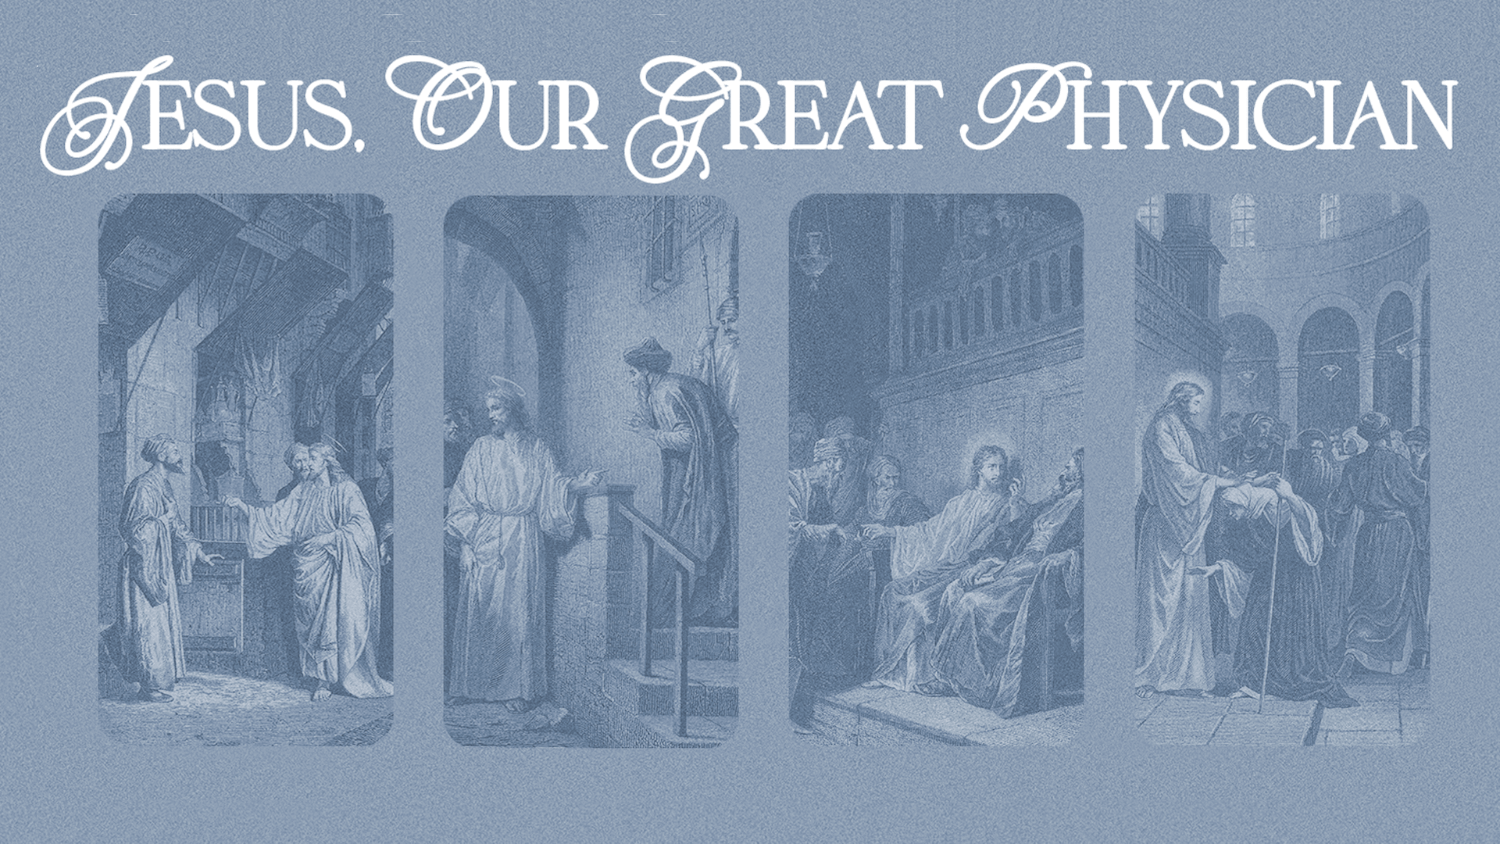 Jesus, Our Great Physician